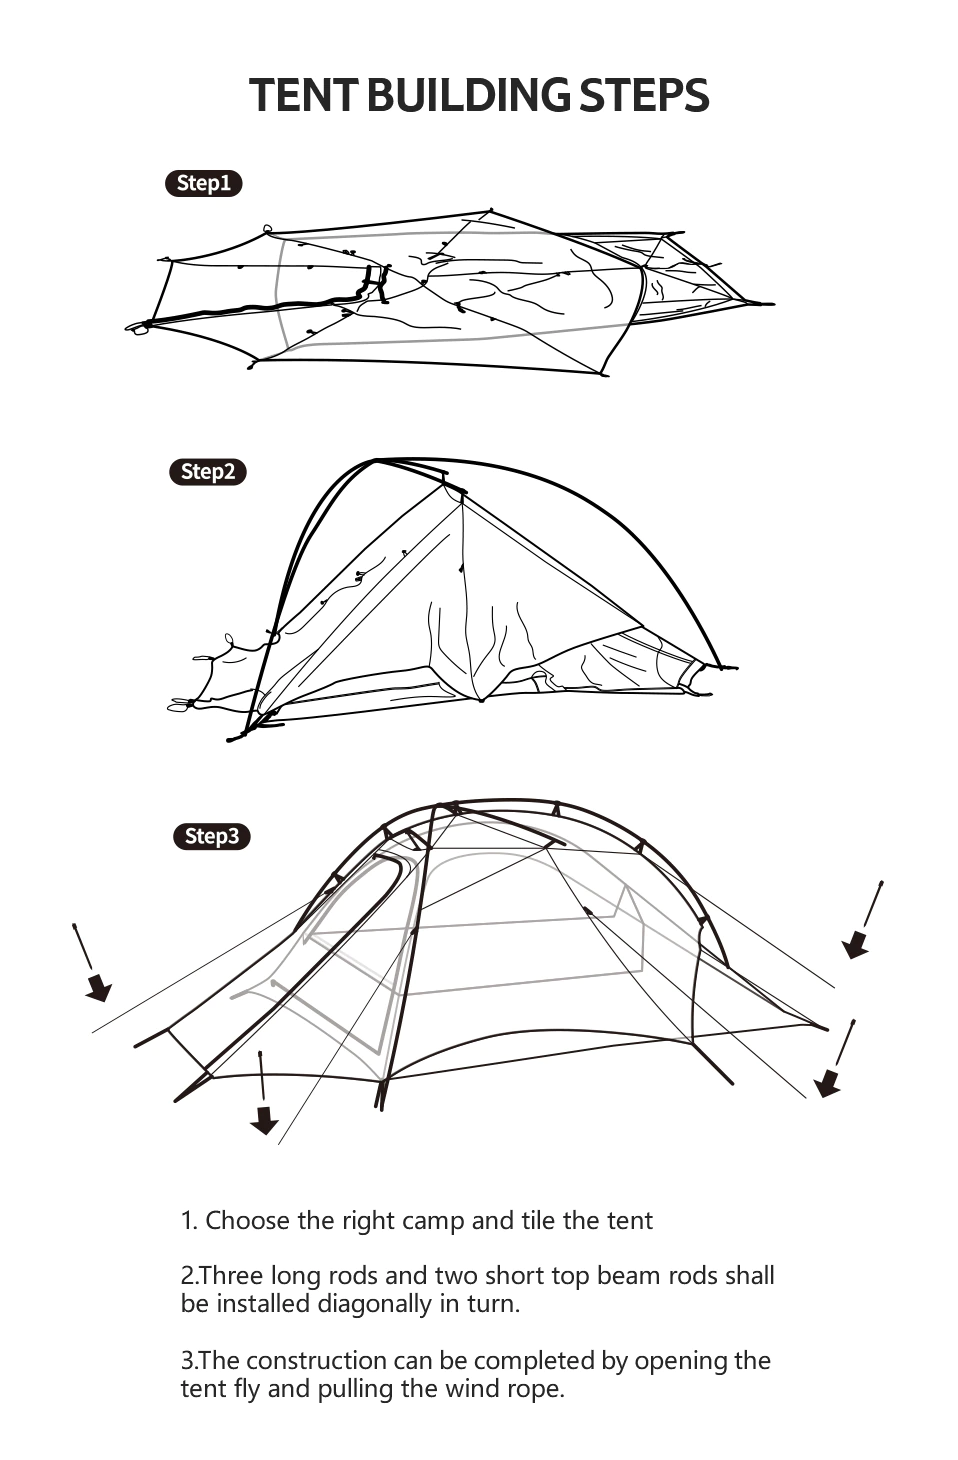 Cheap Goat Tents  CloudUp Wing 2 Man Tent Ultralight Portable Silicon Coated 15D Nylon Hiking Camp Tent Tents 